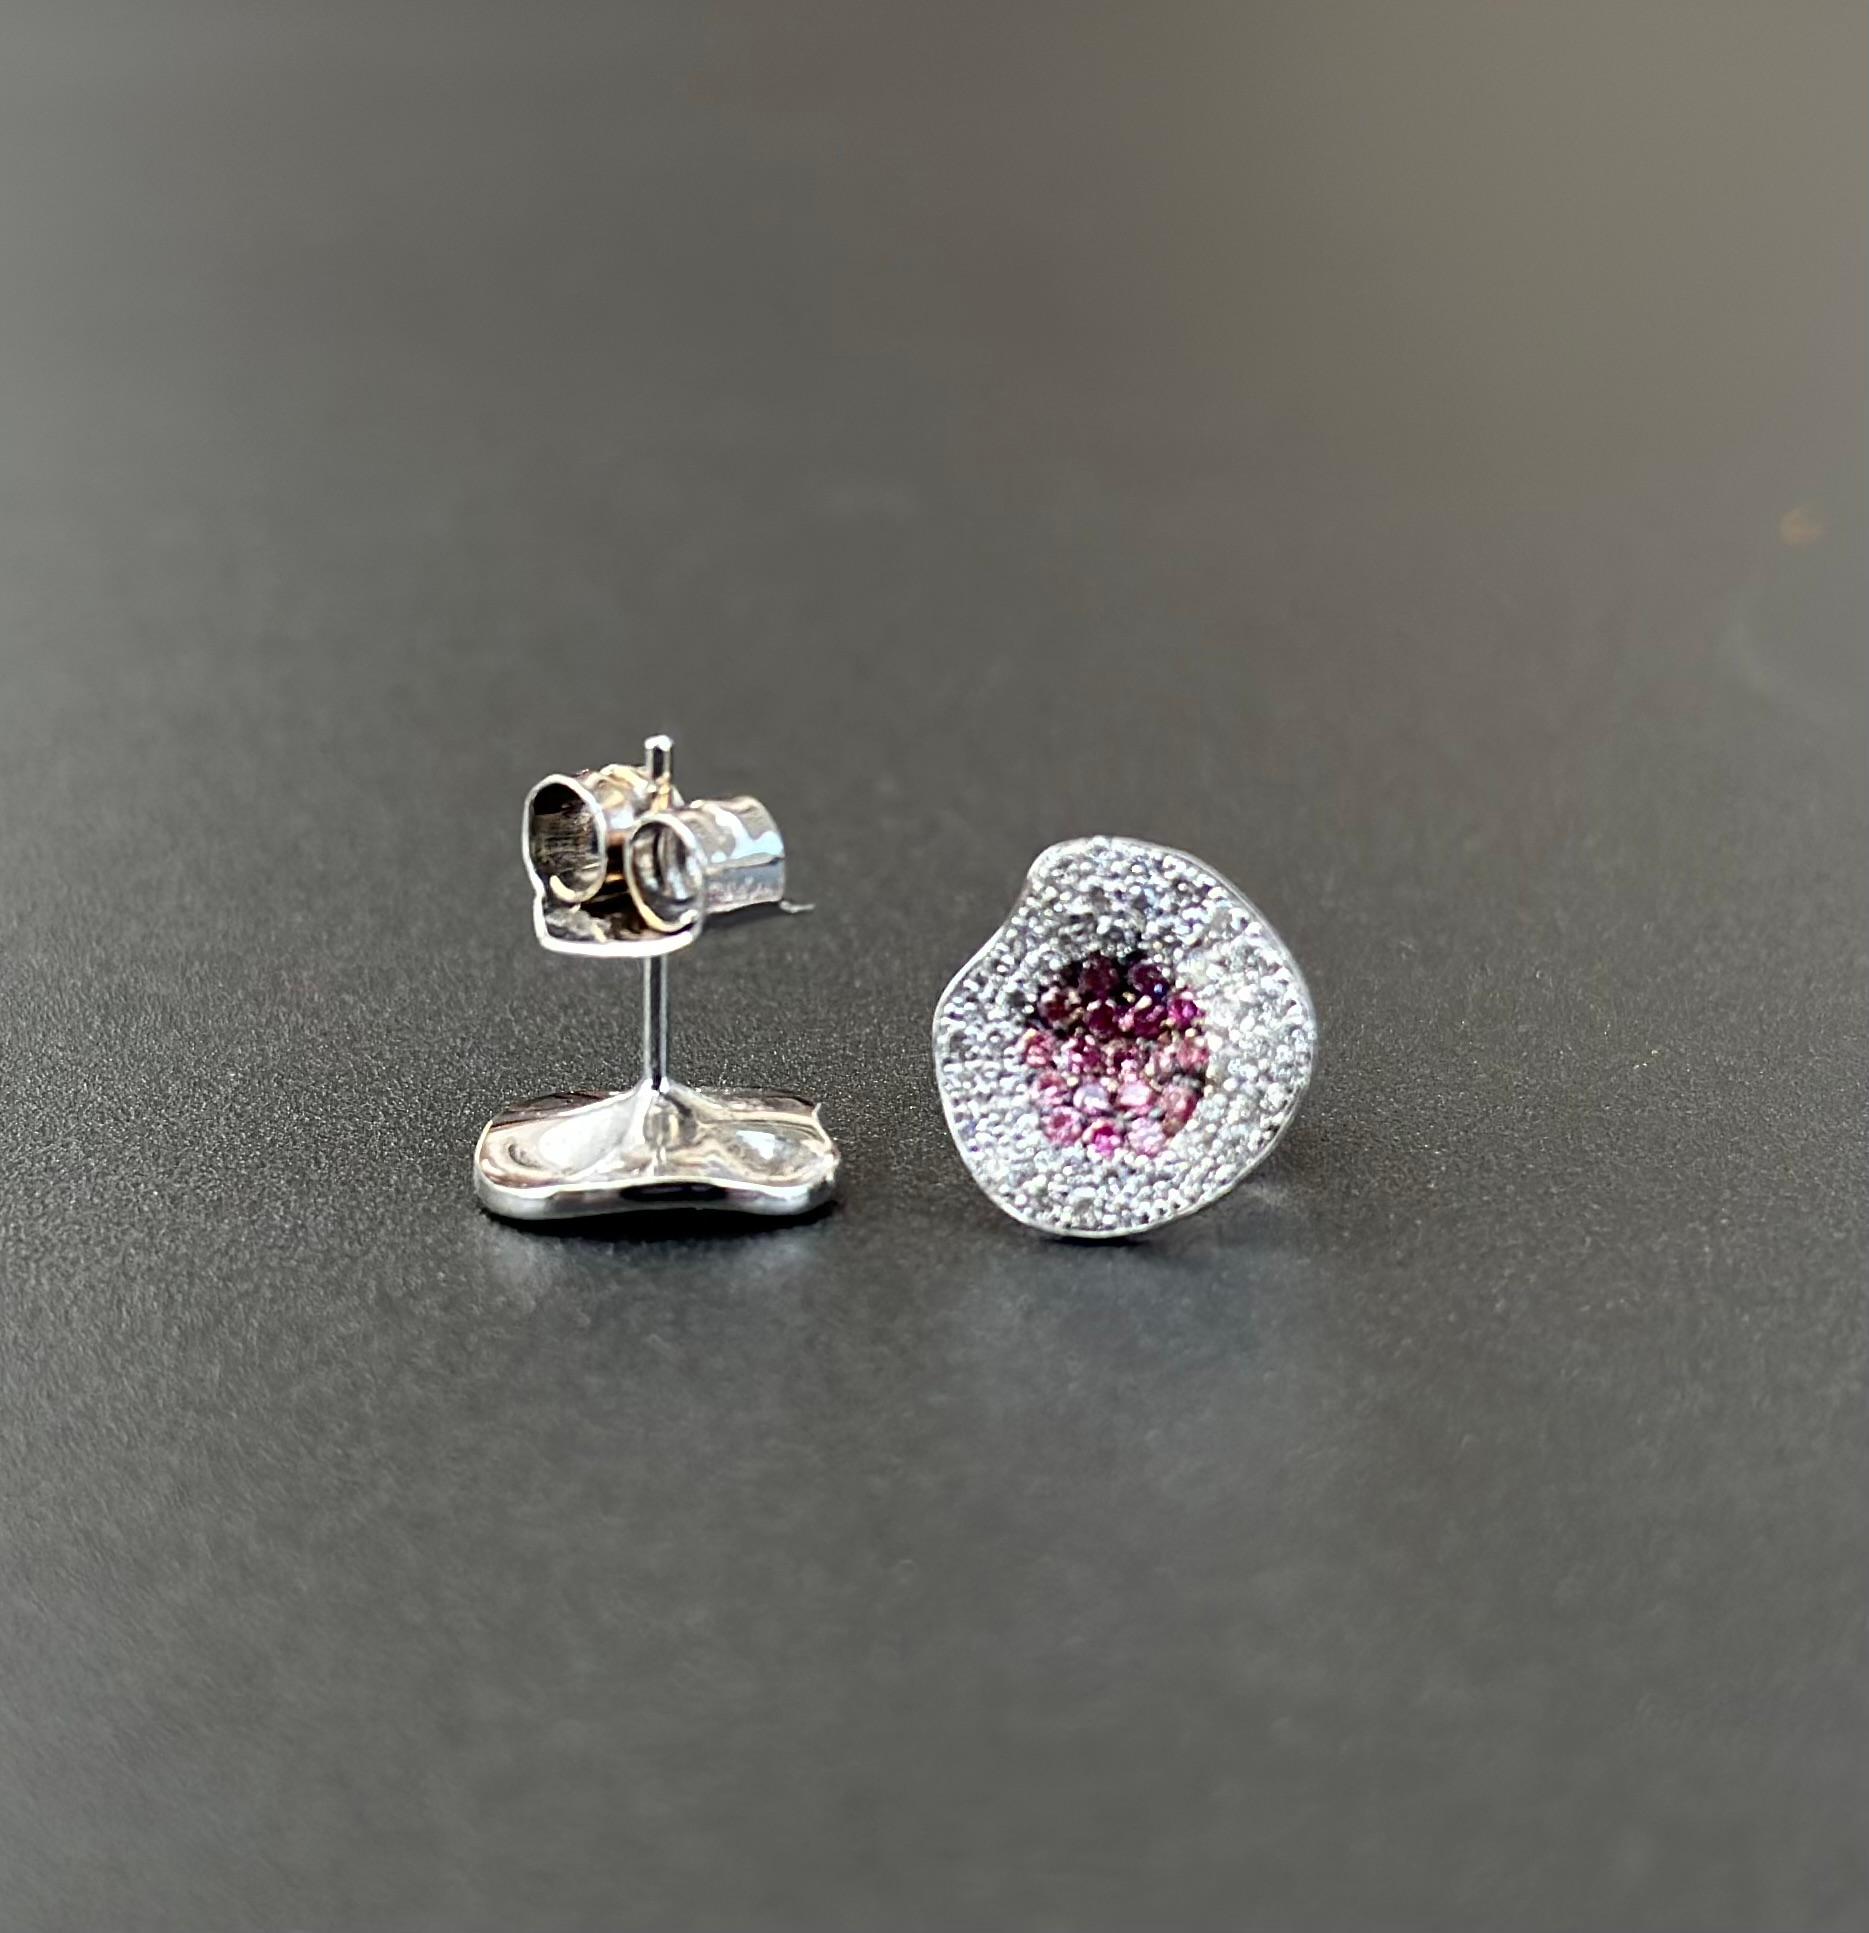 Contemporary White and Pink Diamond Stud Earrings set in White Gold